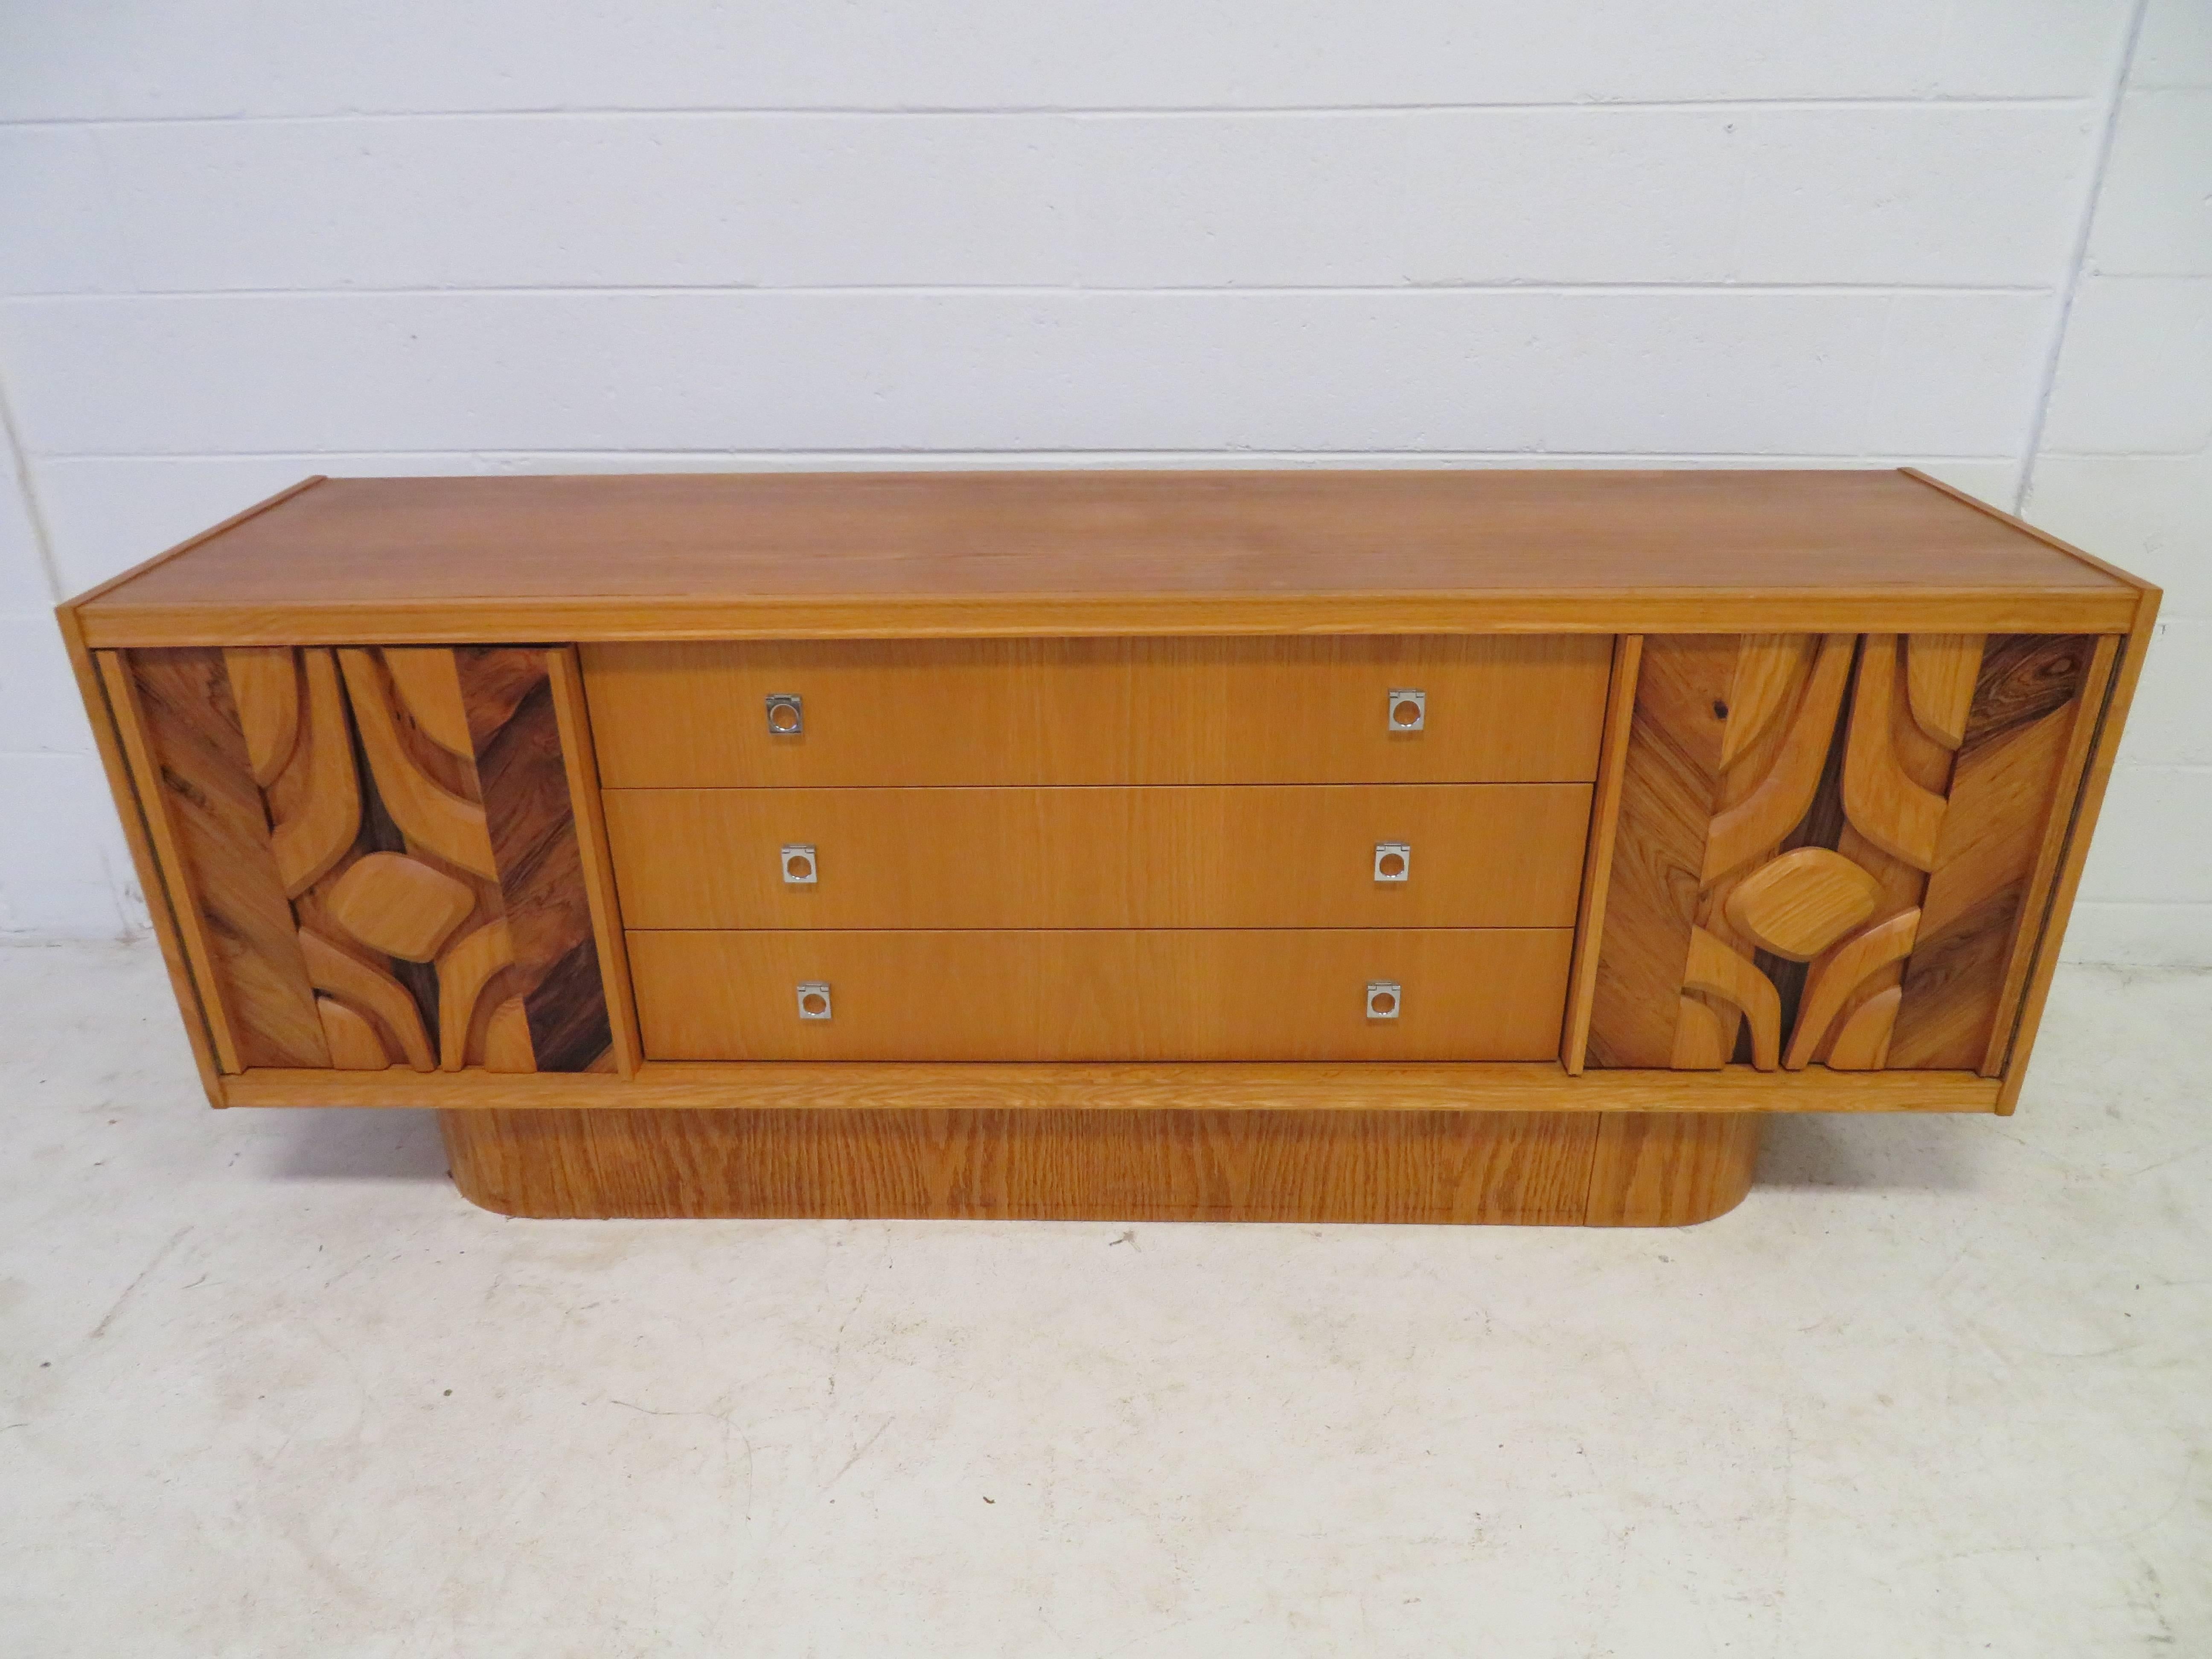 Unusual sculptural front-light wood credenza. This piece not only has great style but has tons of storage options-three long drawers and doors that open to reveal one adjustable shelf on each side.